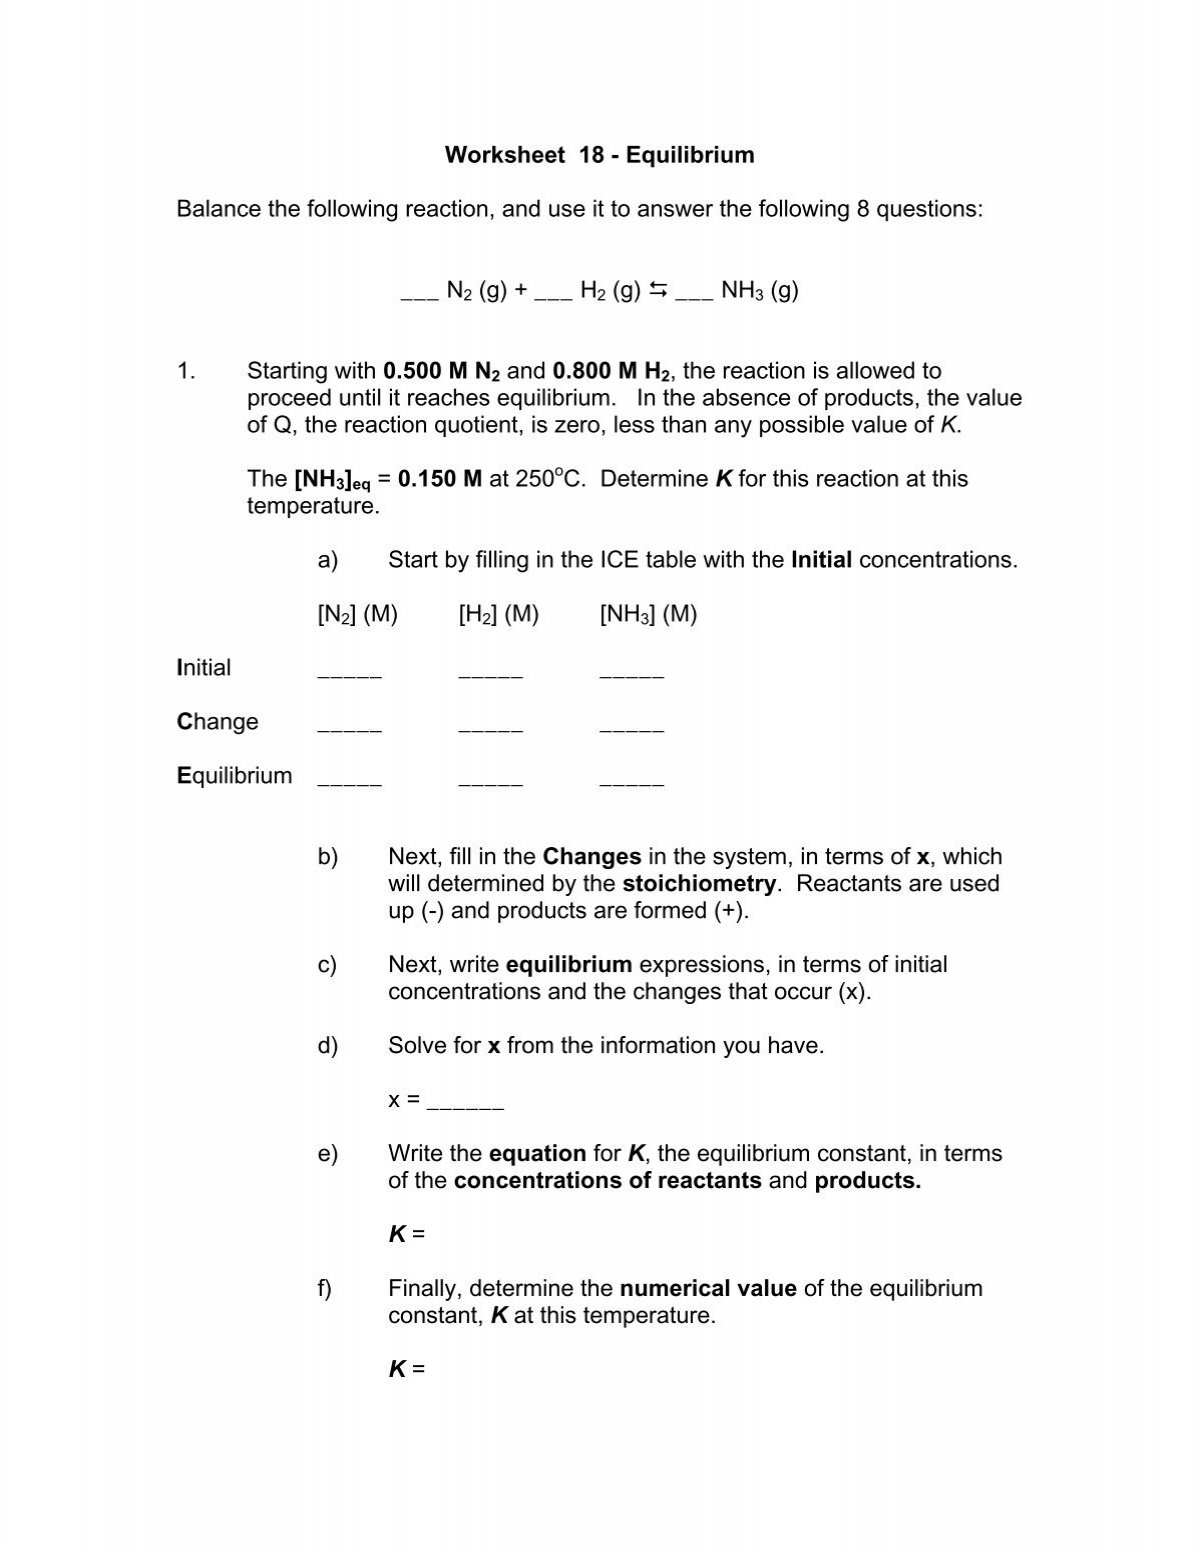 8-calculating-equilibrium-constants-chem-worksheet-18-3-answers-abukarlie